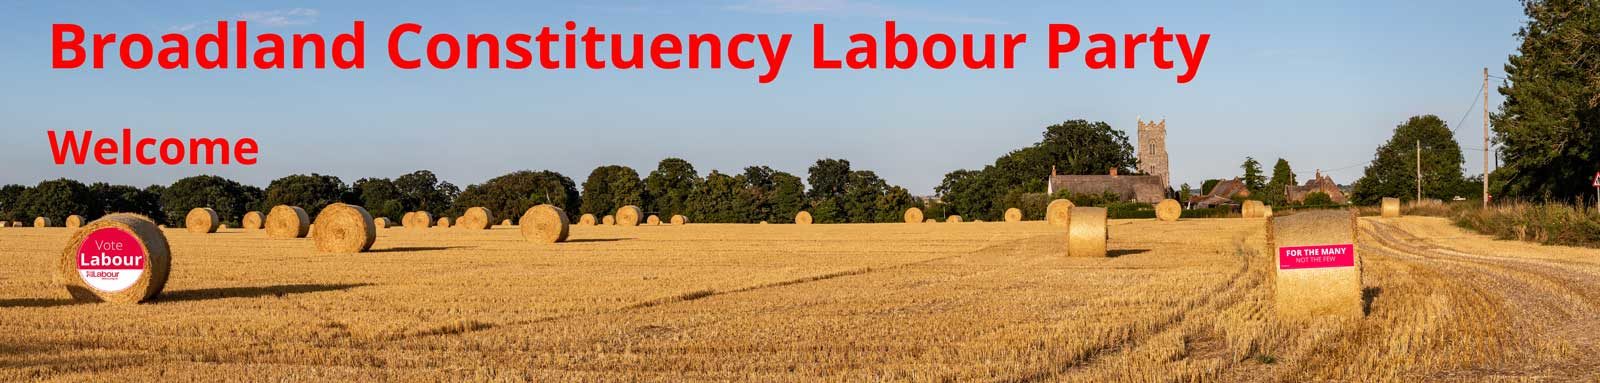  Broadland Constituency Labour Party